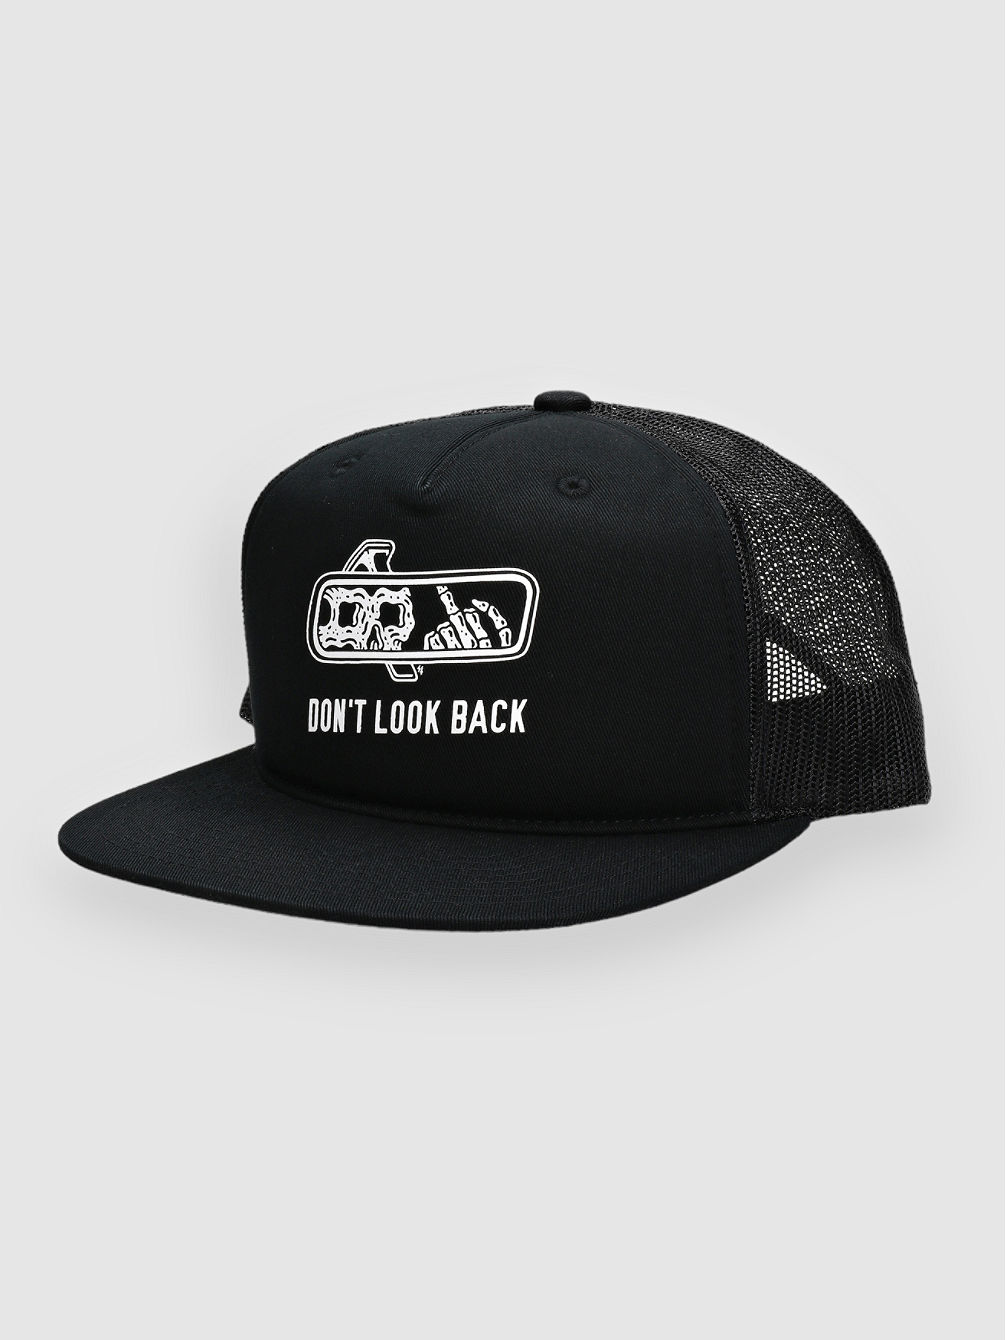 Dont Look Back Mesh Cappellino